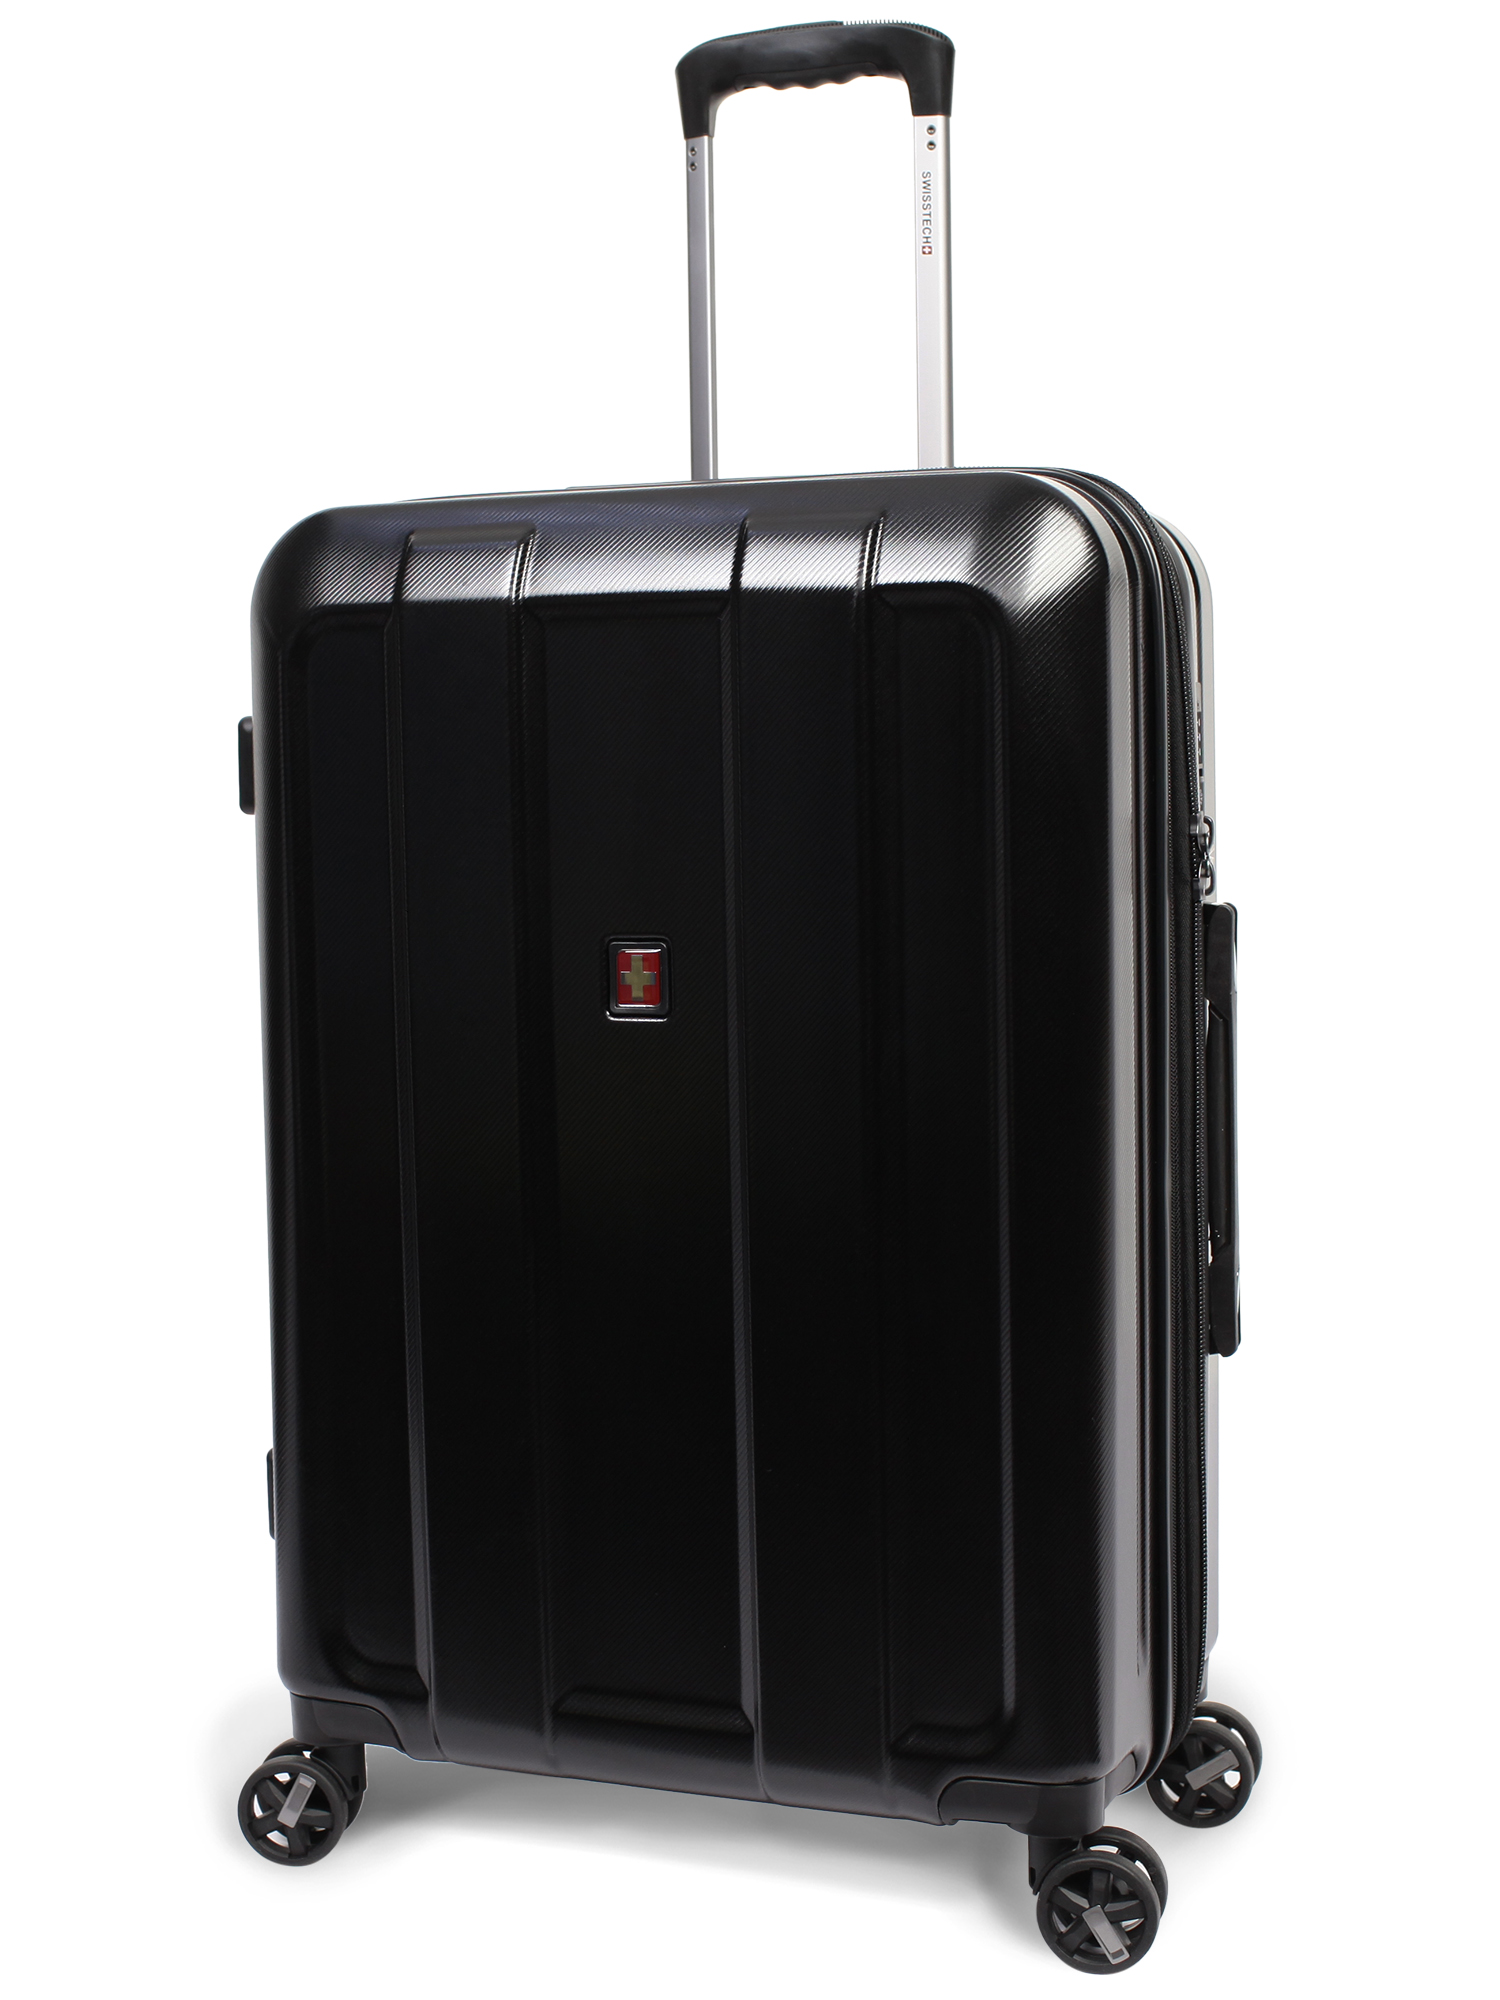 SwissTech Navigation 25" Hardside Checked Luggage, 25"H x 17.5"W x 10"D - image 1 of 16